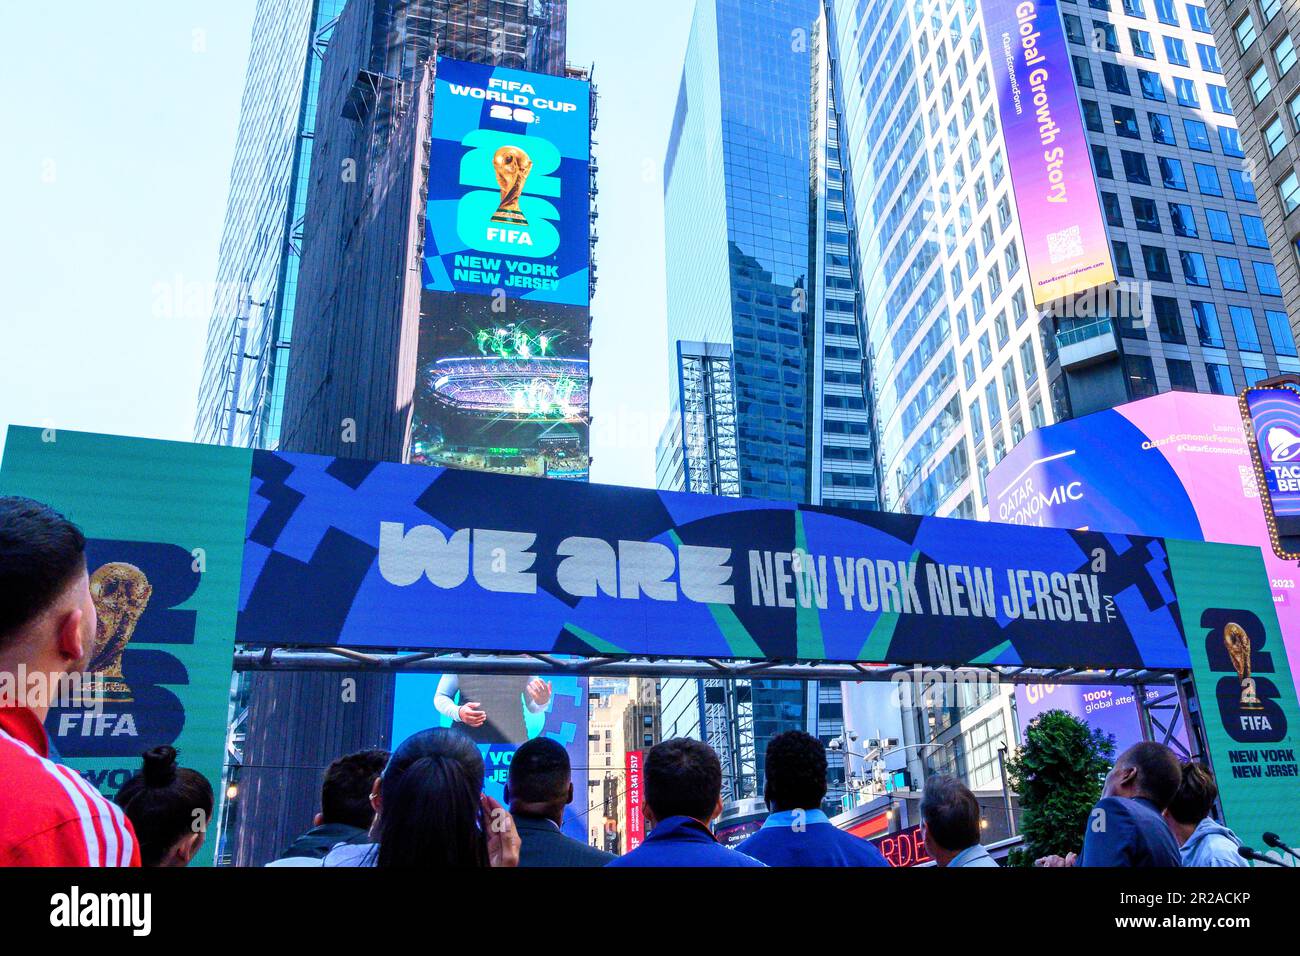 New York, USA. 18th May, 2023. People watch billboards displaying the official logos for the FIFA World Cup 2026 New York/New Jersey at a launch Event in Times Square. The event unveiled the official themes for the MetLife stadium matches: 'We are NYNJ' and 'We are 26'. The world's top soccer competition is already planning to host 8 matches in the New York/New Jersey area and the local organizers want to host the final game here too. Credit: Enrique Shore/Alamy Live News Stock Photo